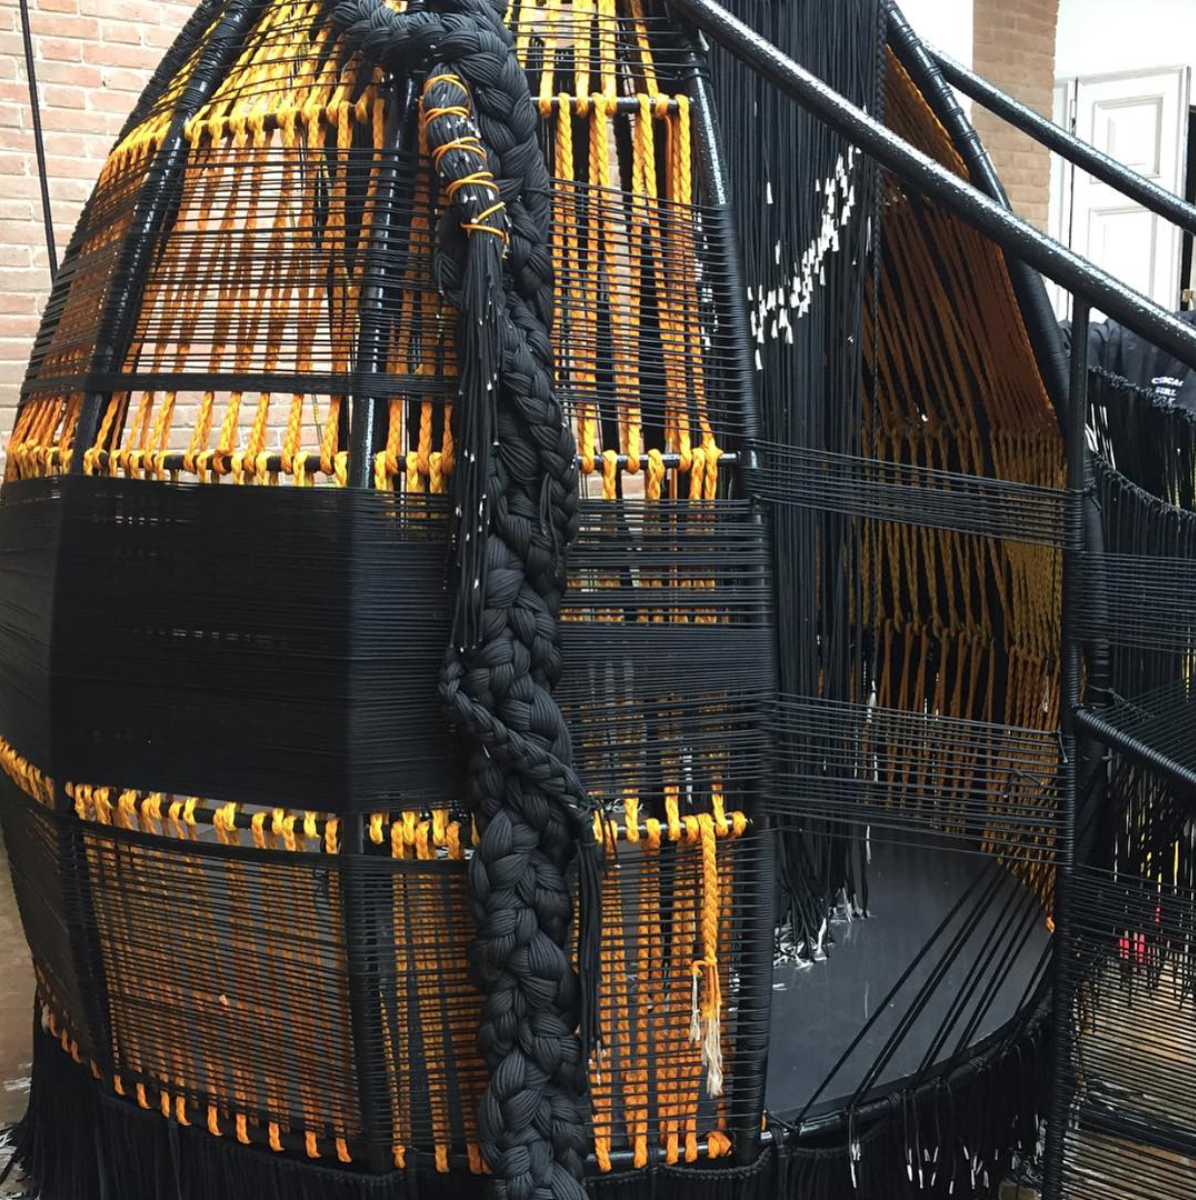 Image: Detail of Thrival Geographies (In My Mind I See a Line) by Amanda Williams + Andres L. Hernandez, in collaboration with Shani Crowe at the 2018 U.S. Pavilion. The image shows the inhabitable part of the structure, focusing on the details of the exterior, including the weaving of black and yellow ropes, and thick, black braids falling along the outer wall. Photo from Shani Crowe's Instagram.